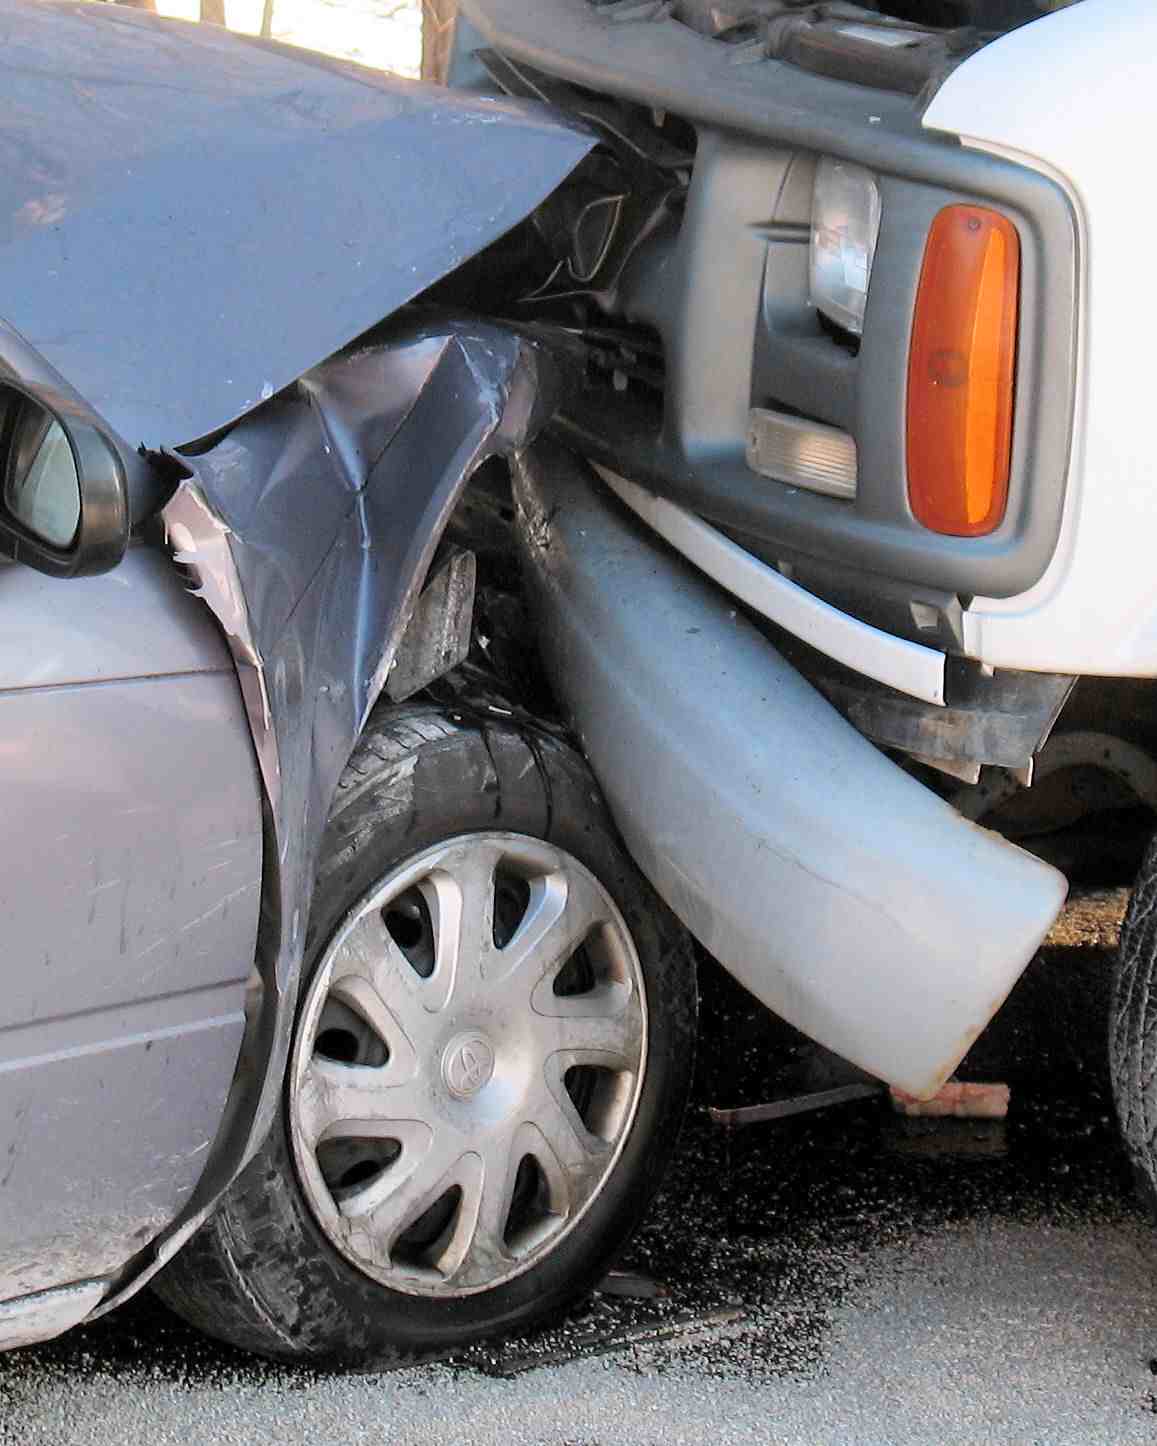 Older drivers are at a disproportionate risk for becoming involved in fatal auto accidents.